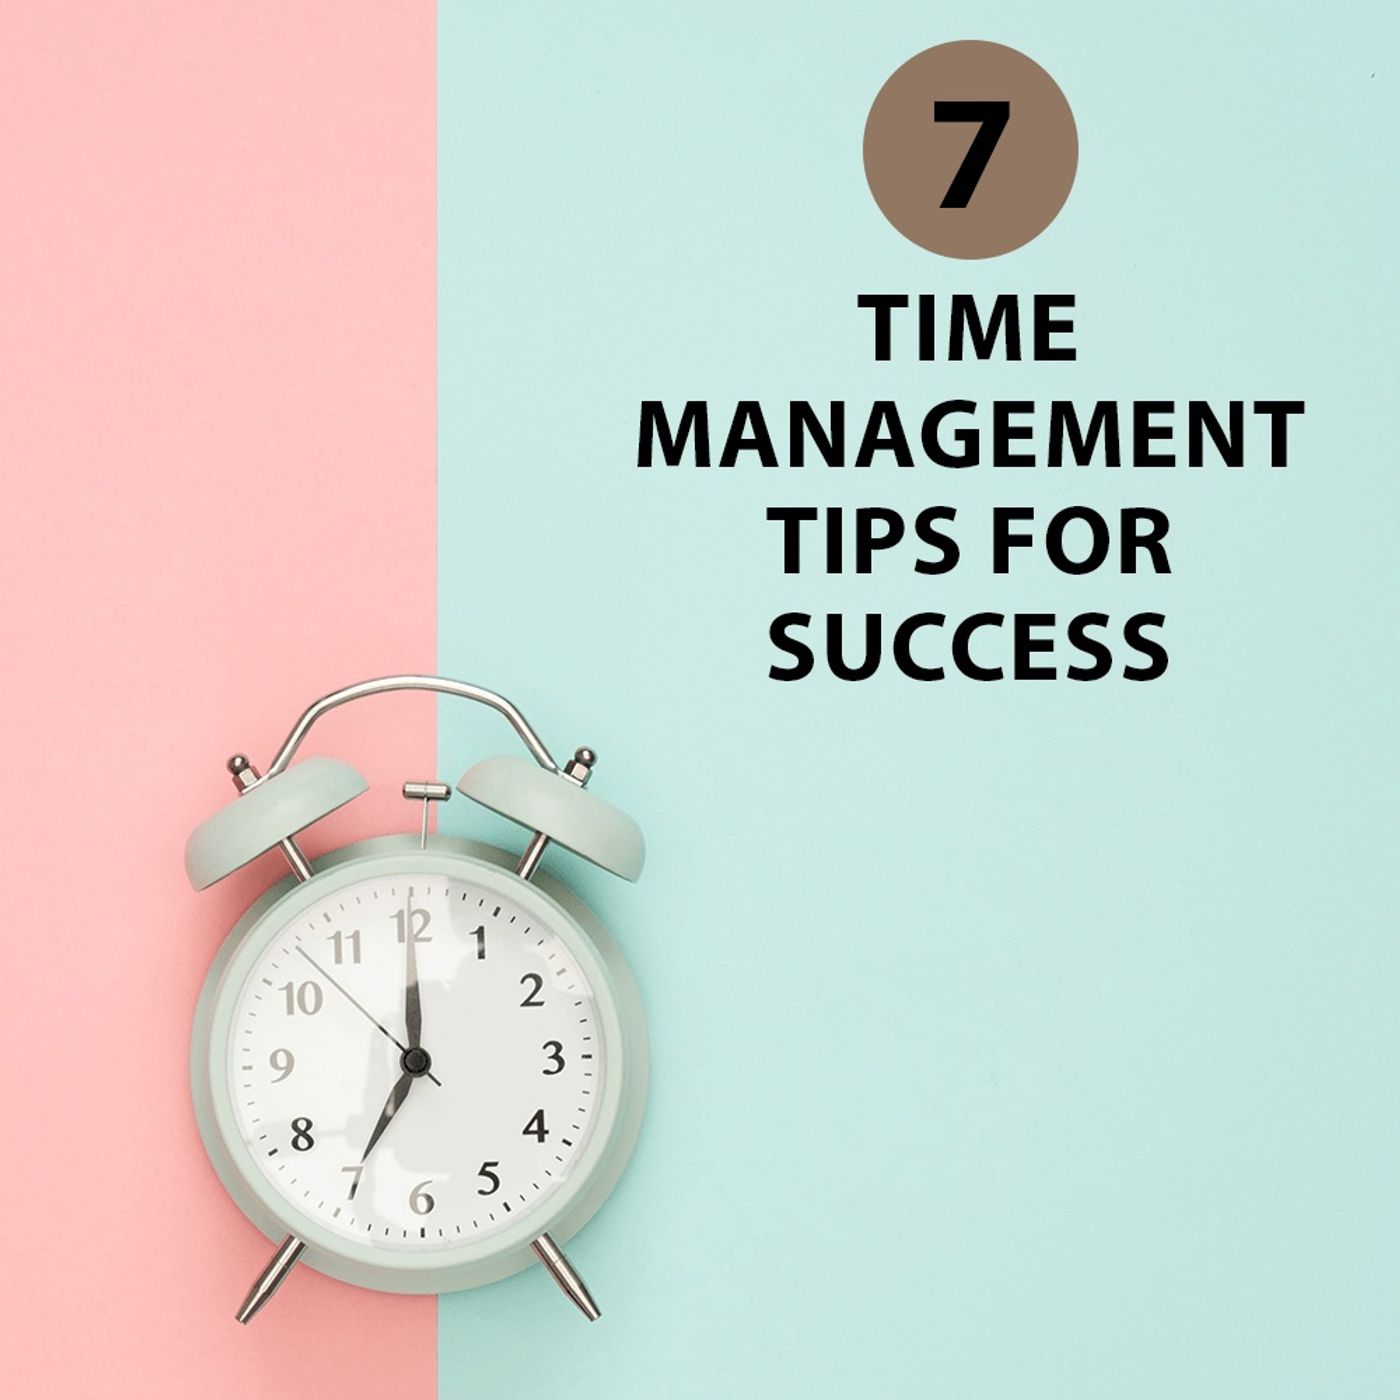 Know these 7 tips for you to manage your time better